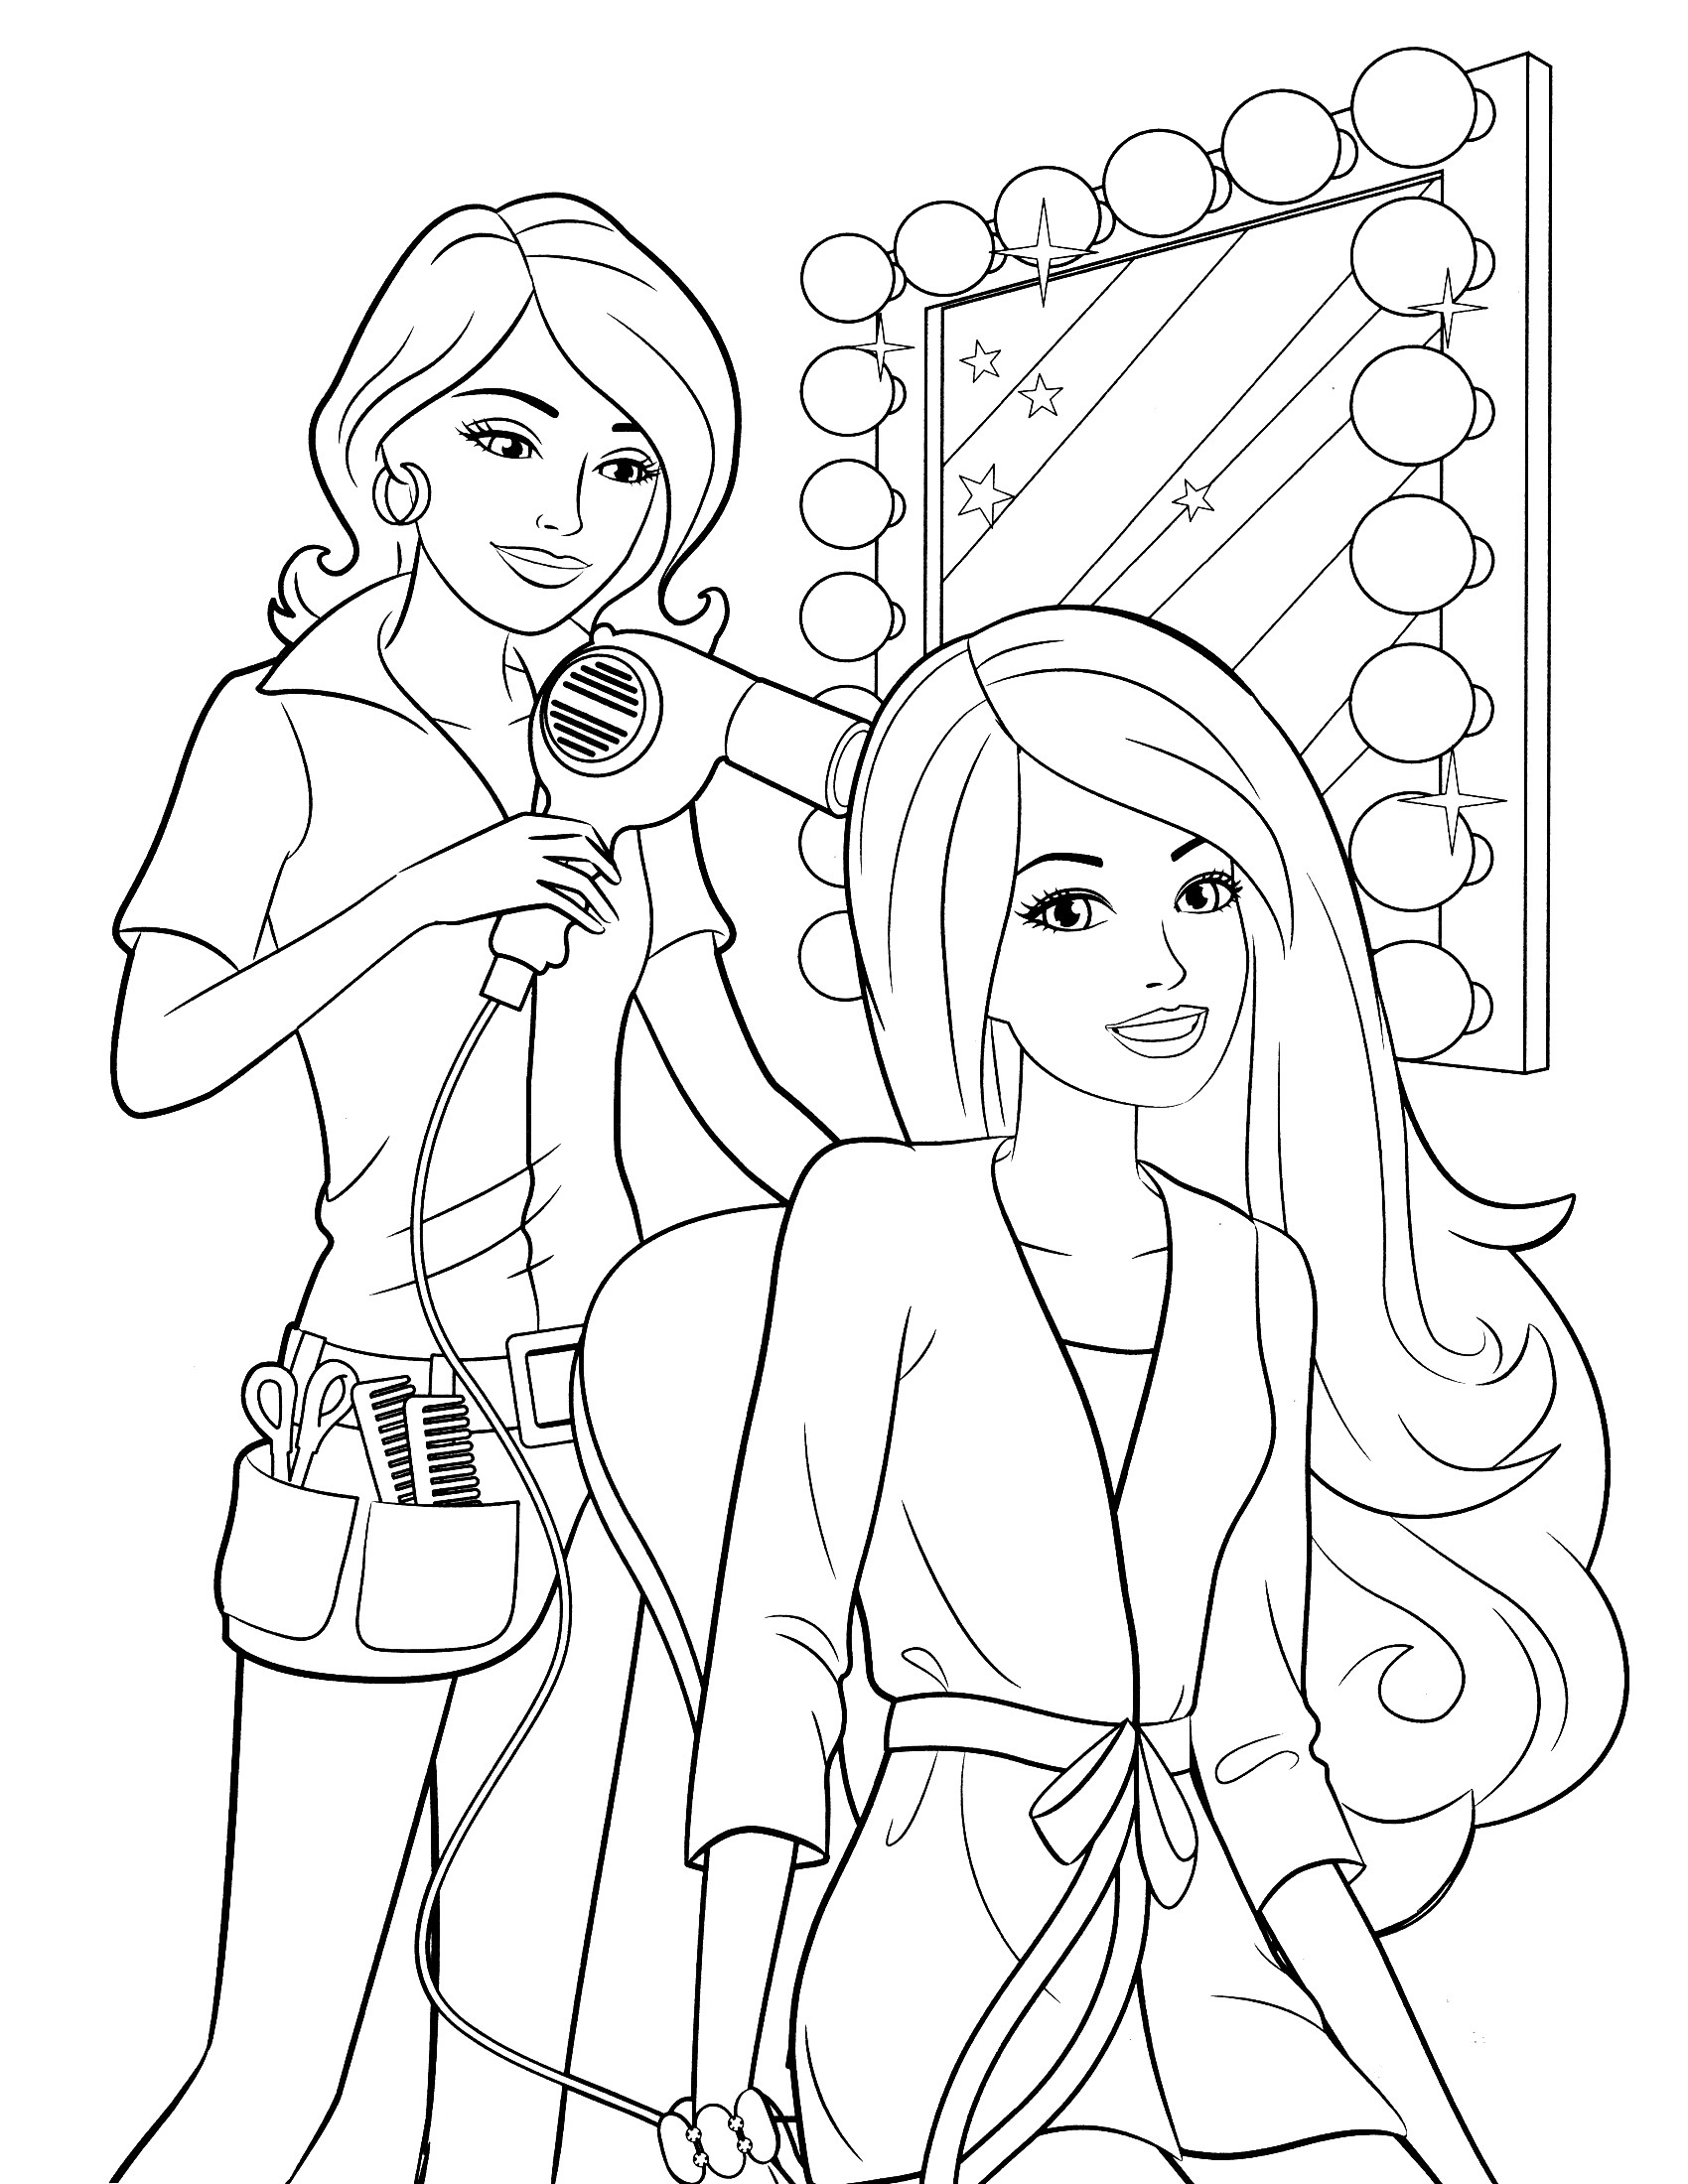 Coloring Book Pages For Girls
 barbie coloring pages for girls